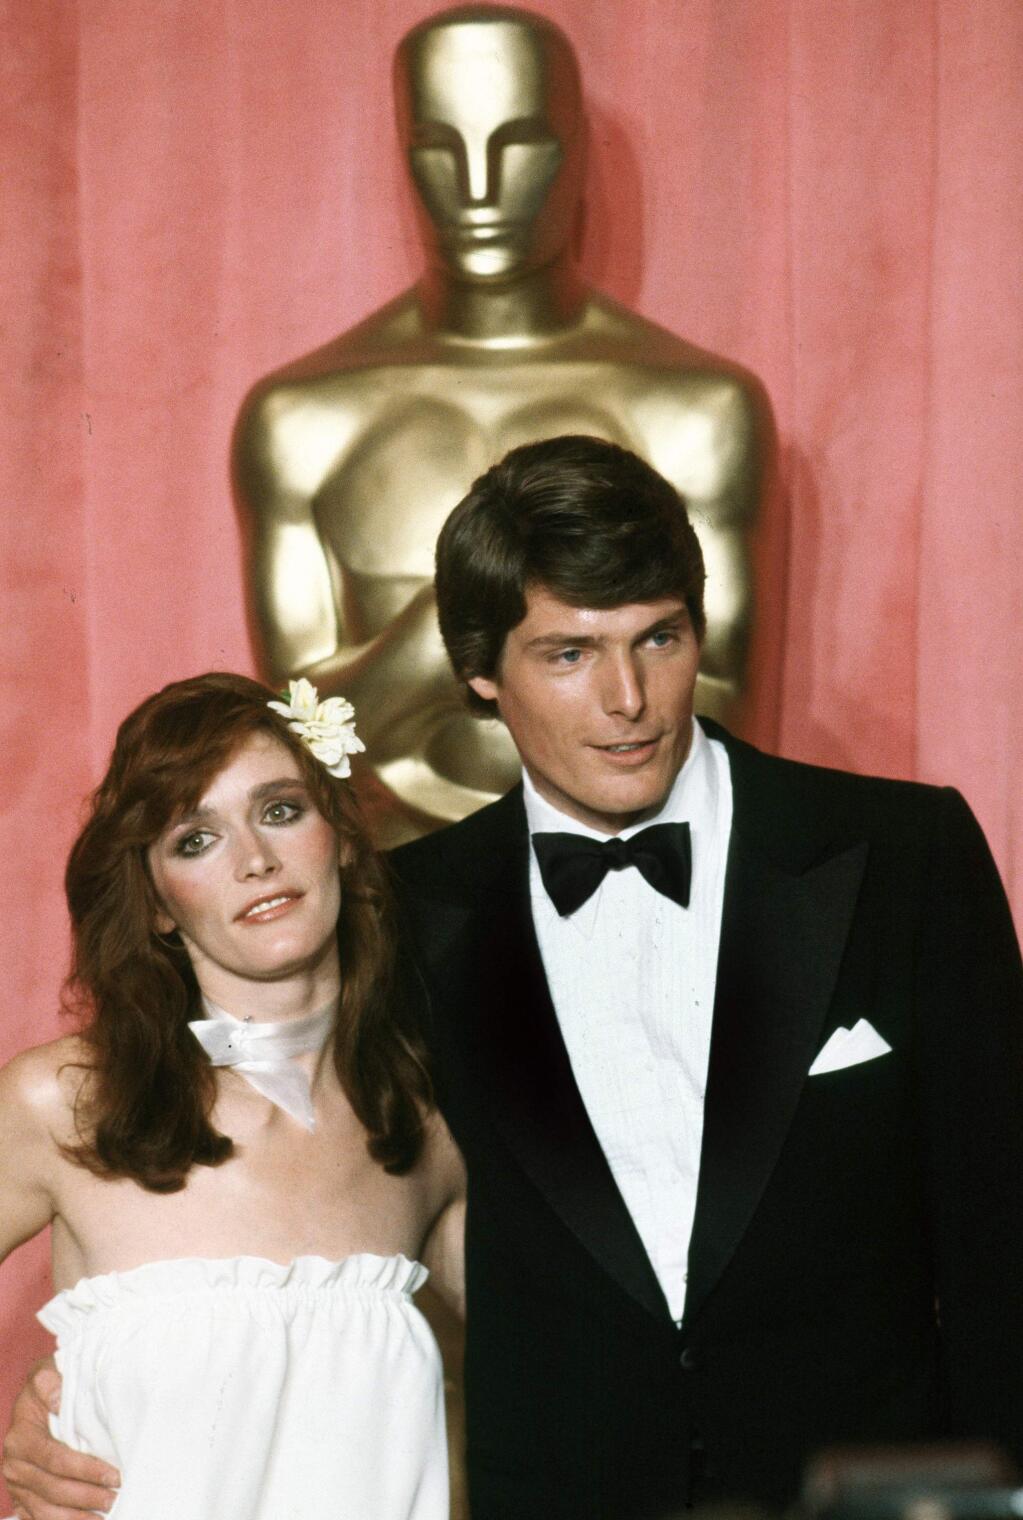 FILE - In this April 9, 1979 file photo, actress Margot Kidder, left, and actor Christopher Reeve appear at the 51st Annual Academy Awards ceremony in Los Angeles. Kidder, who starred as Lois Lane in the “Superman” film franchise of the late 1970s and early 1980s, has died. Franzen-Davis Funeral Home in Livingston, Montana posted a notice on its website saying Kidder died Sunday, May 13, 2918, at her home there. She was 69. (AP Photo/Reed Saxon, File)